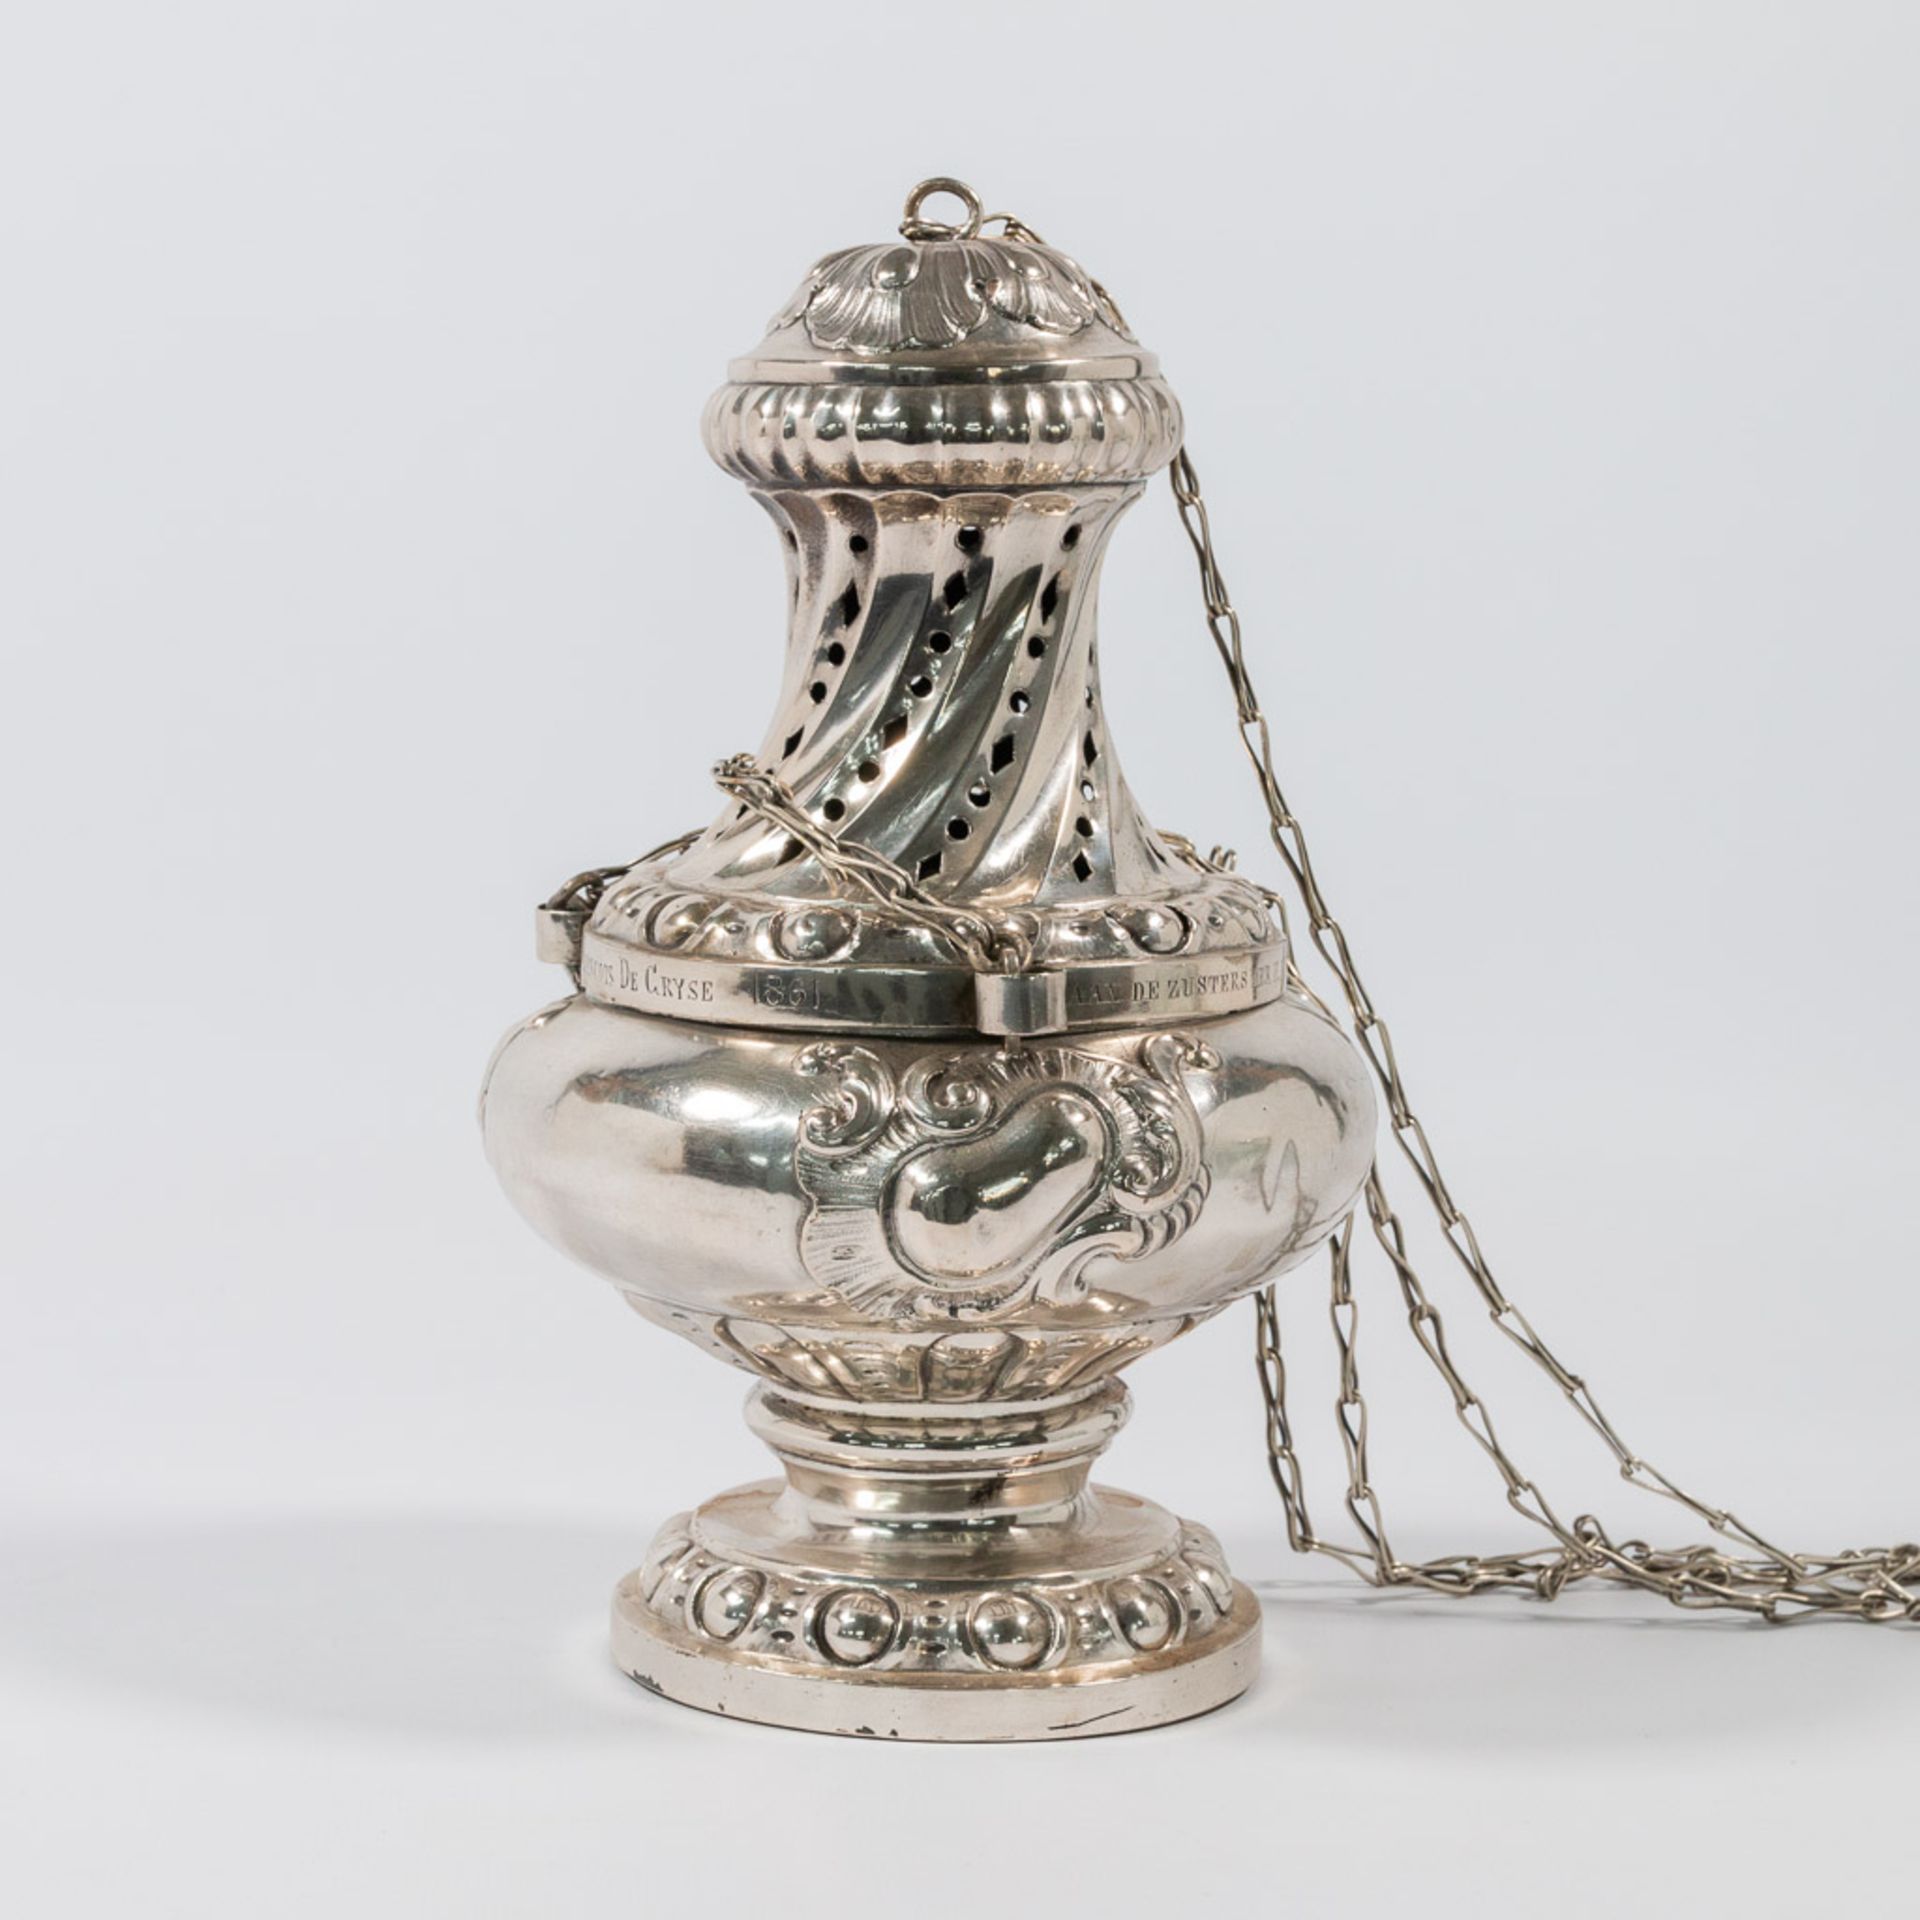 A silver Insence burner and Insence jar. - Image 21 of 39